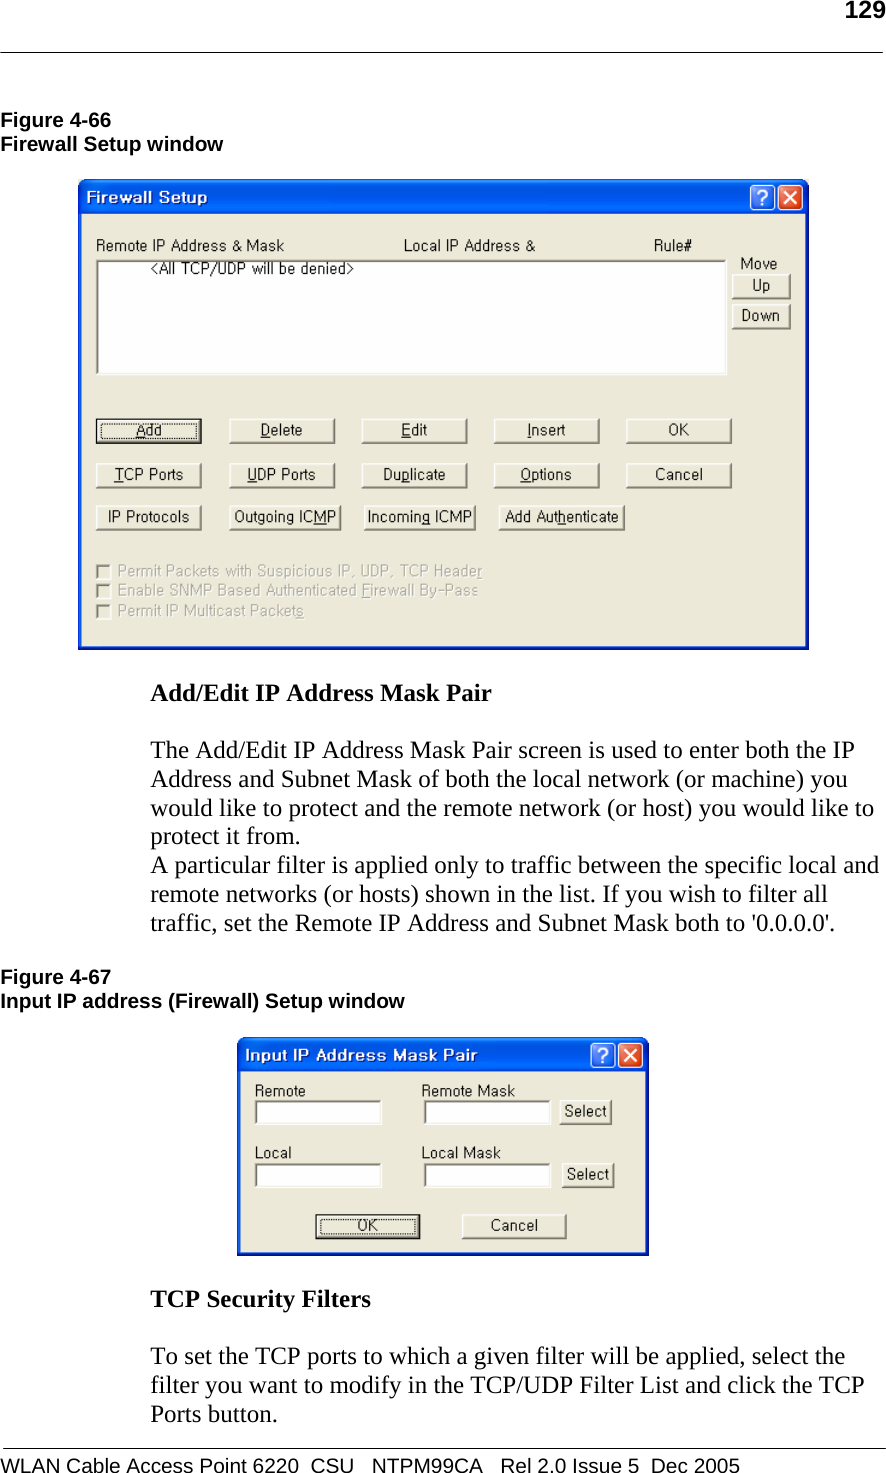   129  WLAN Cable Access Point 6220  CSU   NTPM99CA   Rel 2.0 Issue 5  Dec 2005 Figure 4-66 Firewall Setup window    Add/Edit IP Address Mask Pair   The Add/Edit IP Address Mask Pair screen is used to enter both the IP Address and Subnet Mask of both the local network (or machine) you would like to protect and the remote network (or host) you would like to protect it from. A particular filter is applied only to traffic between the specific local and remote networks (or hosts) shown in the list. If you wish to filter all traffic, set the Remote IP Address and Subnet Mask both to &apos;0.0.0.0&apos;.  Figure 4-67 Input IP address (Firewall) Setup window    TCP Security Filters   To set the TCP ports to which a given filter will be applied, select the filter you want to modify in the TCP/UDP Filter List and click the TCP Ports button. 